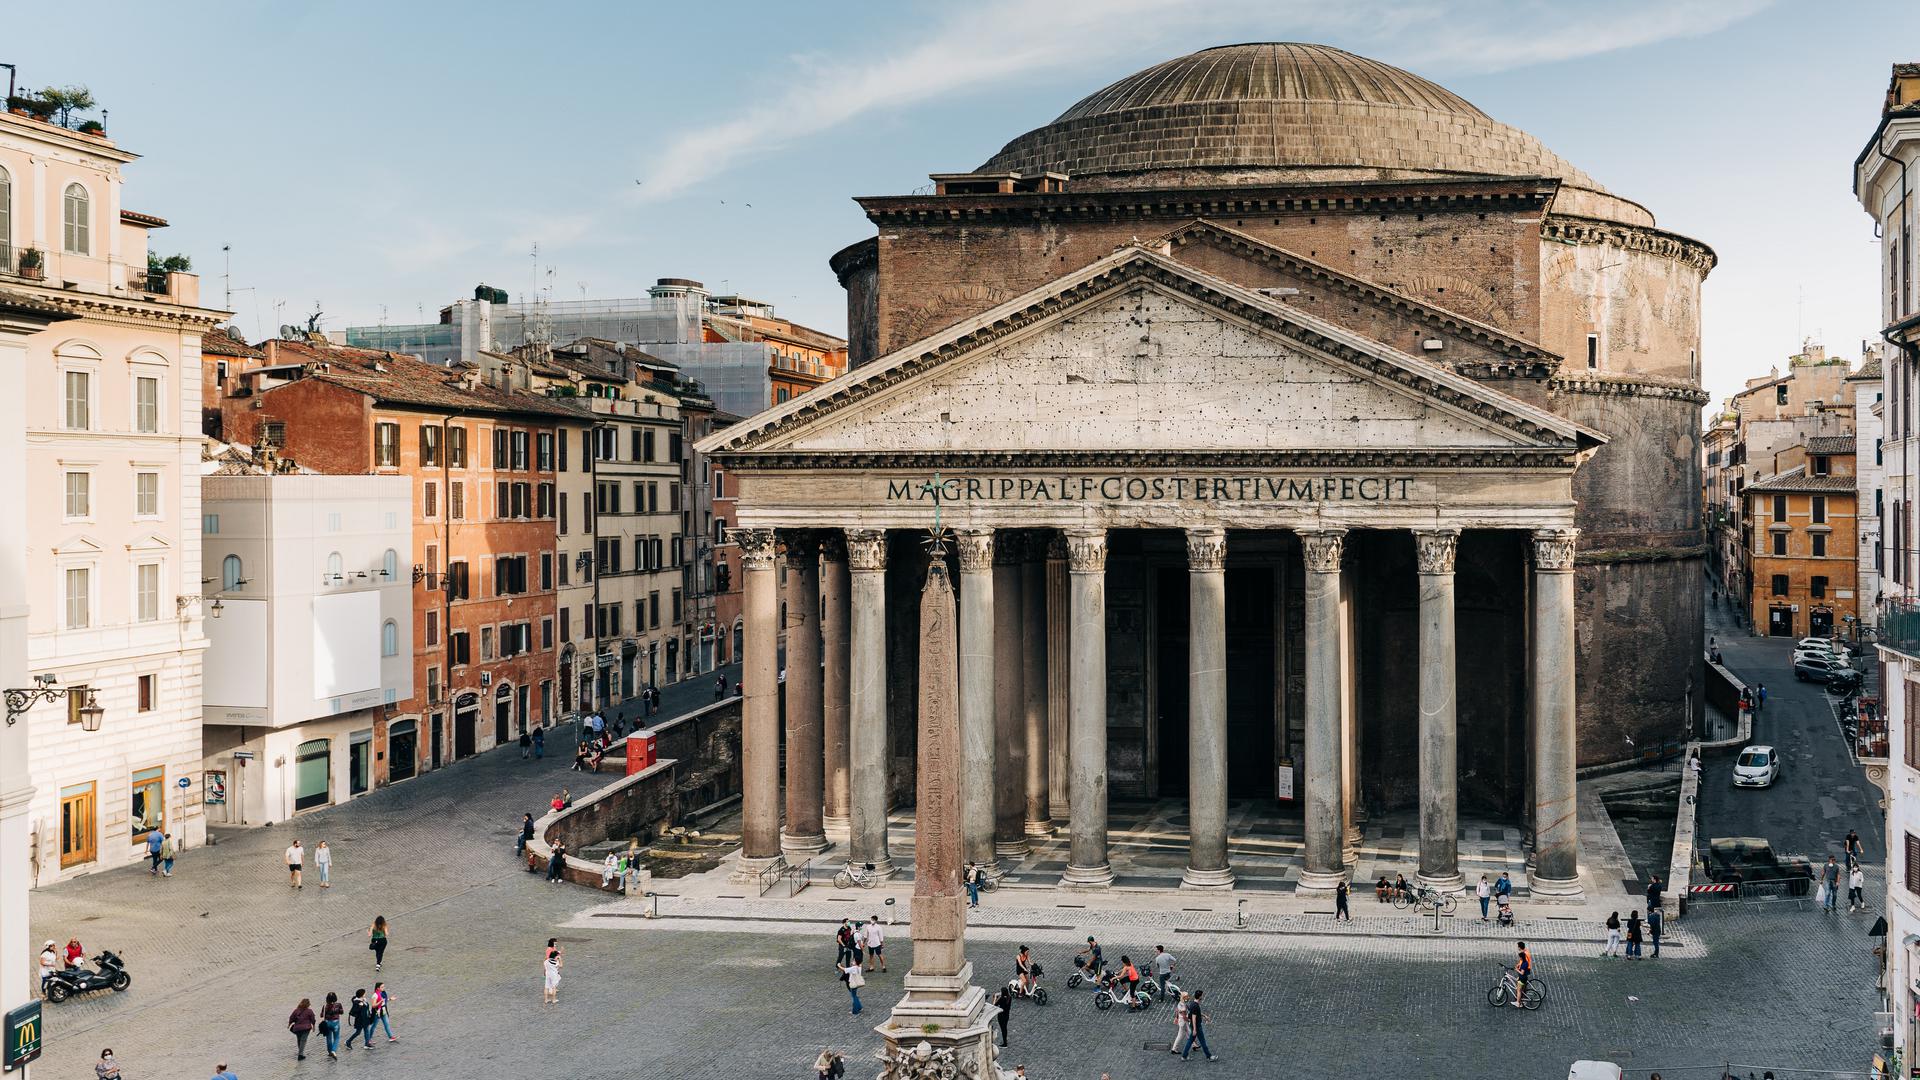 The Pantheon in Rome, Italy.